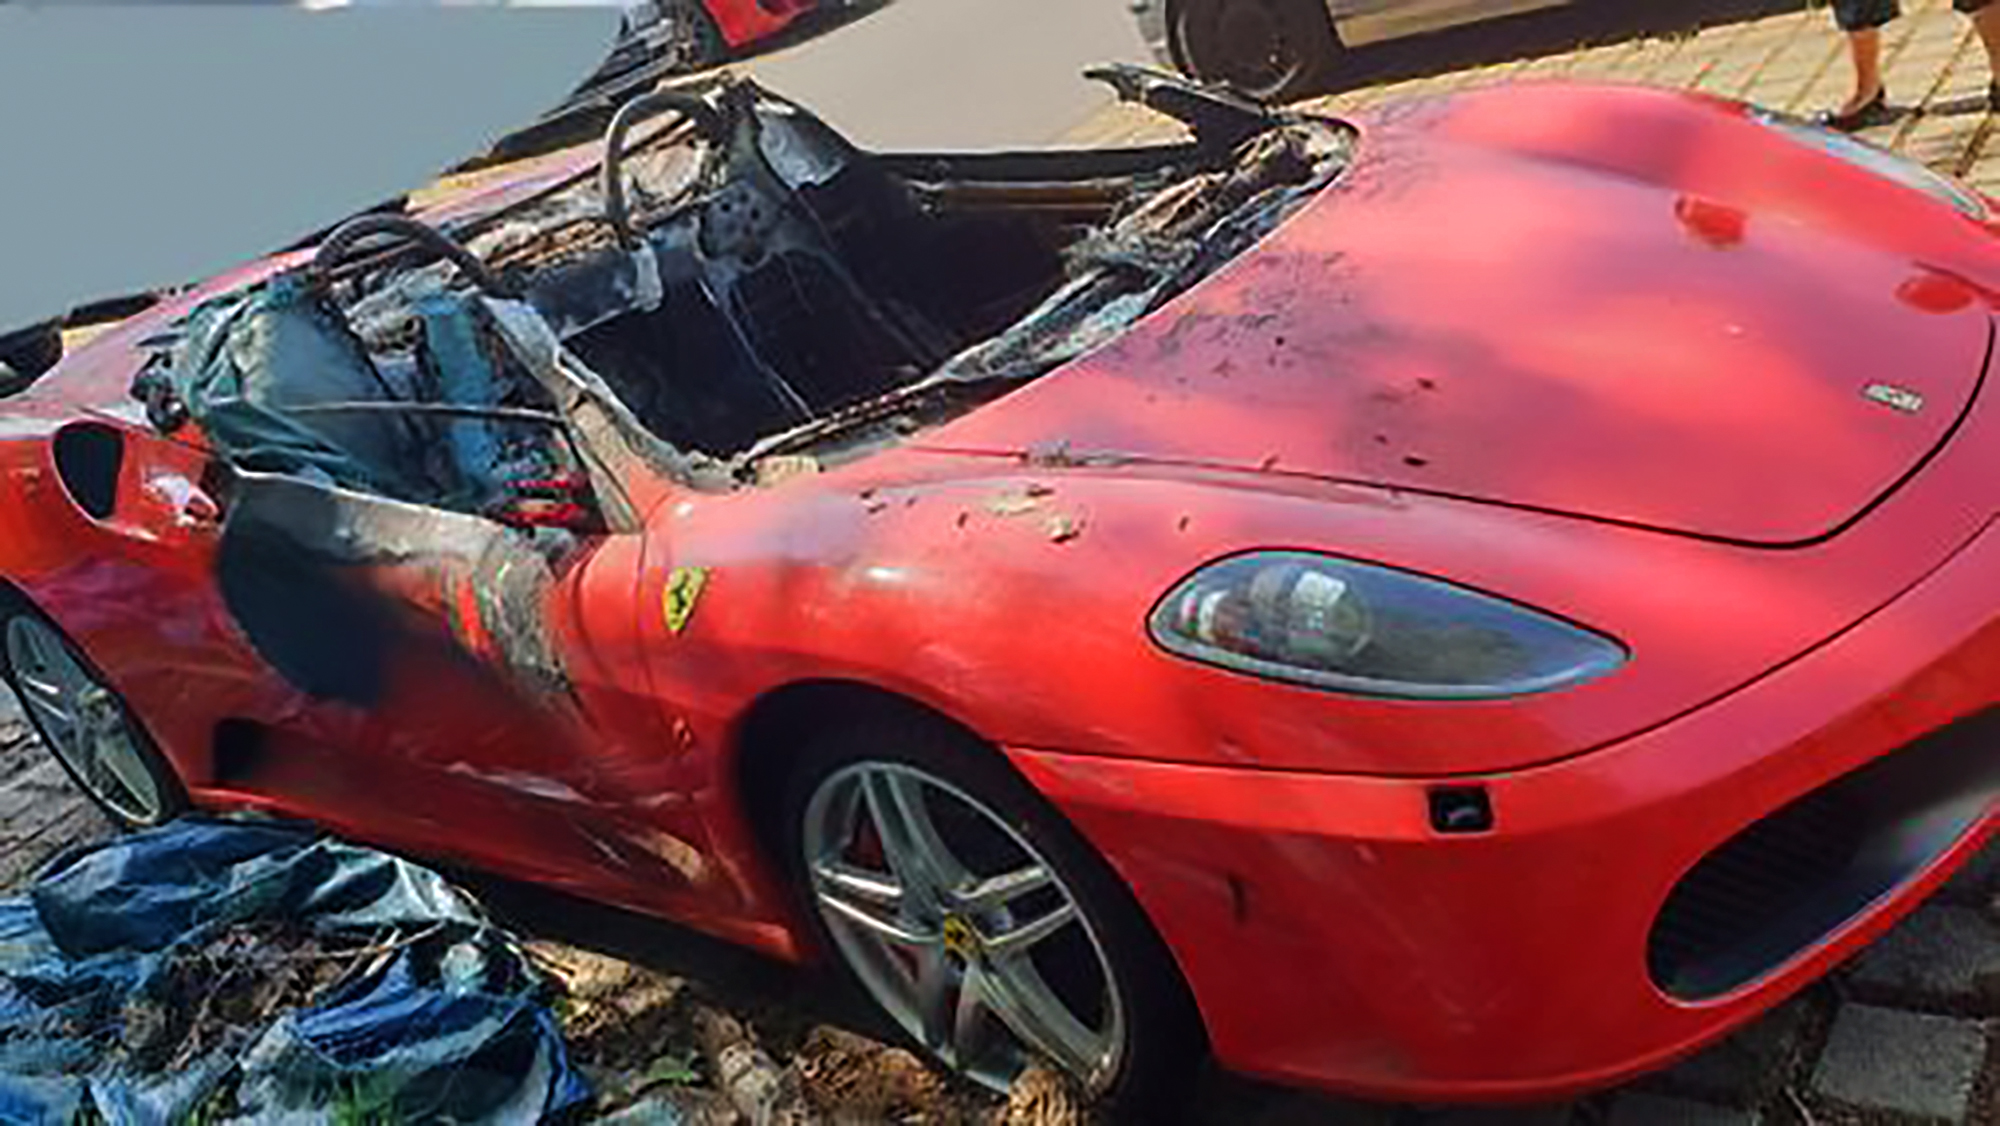 Read more about the article Clapped Out Car Bomb Ferrari Being Sold For 18,000 GBP